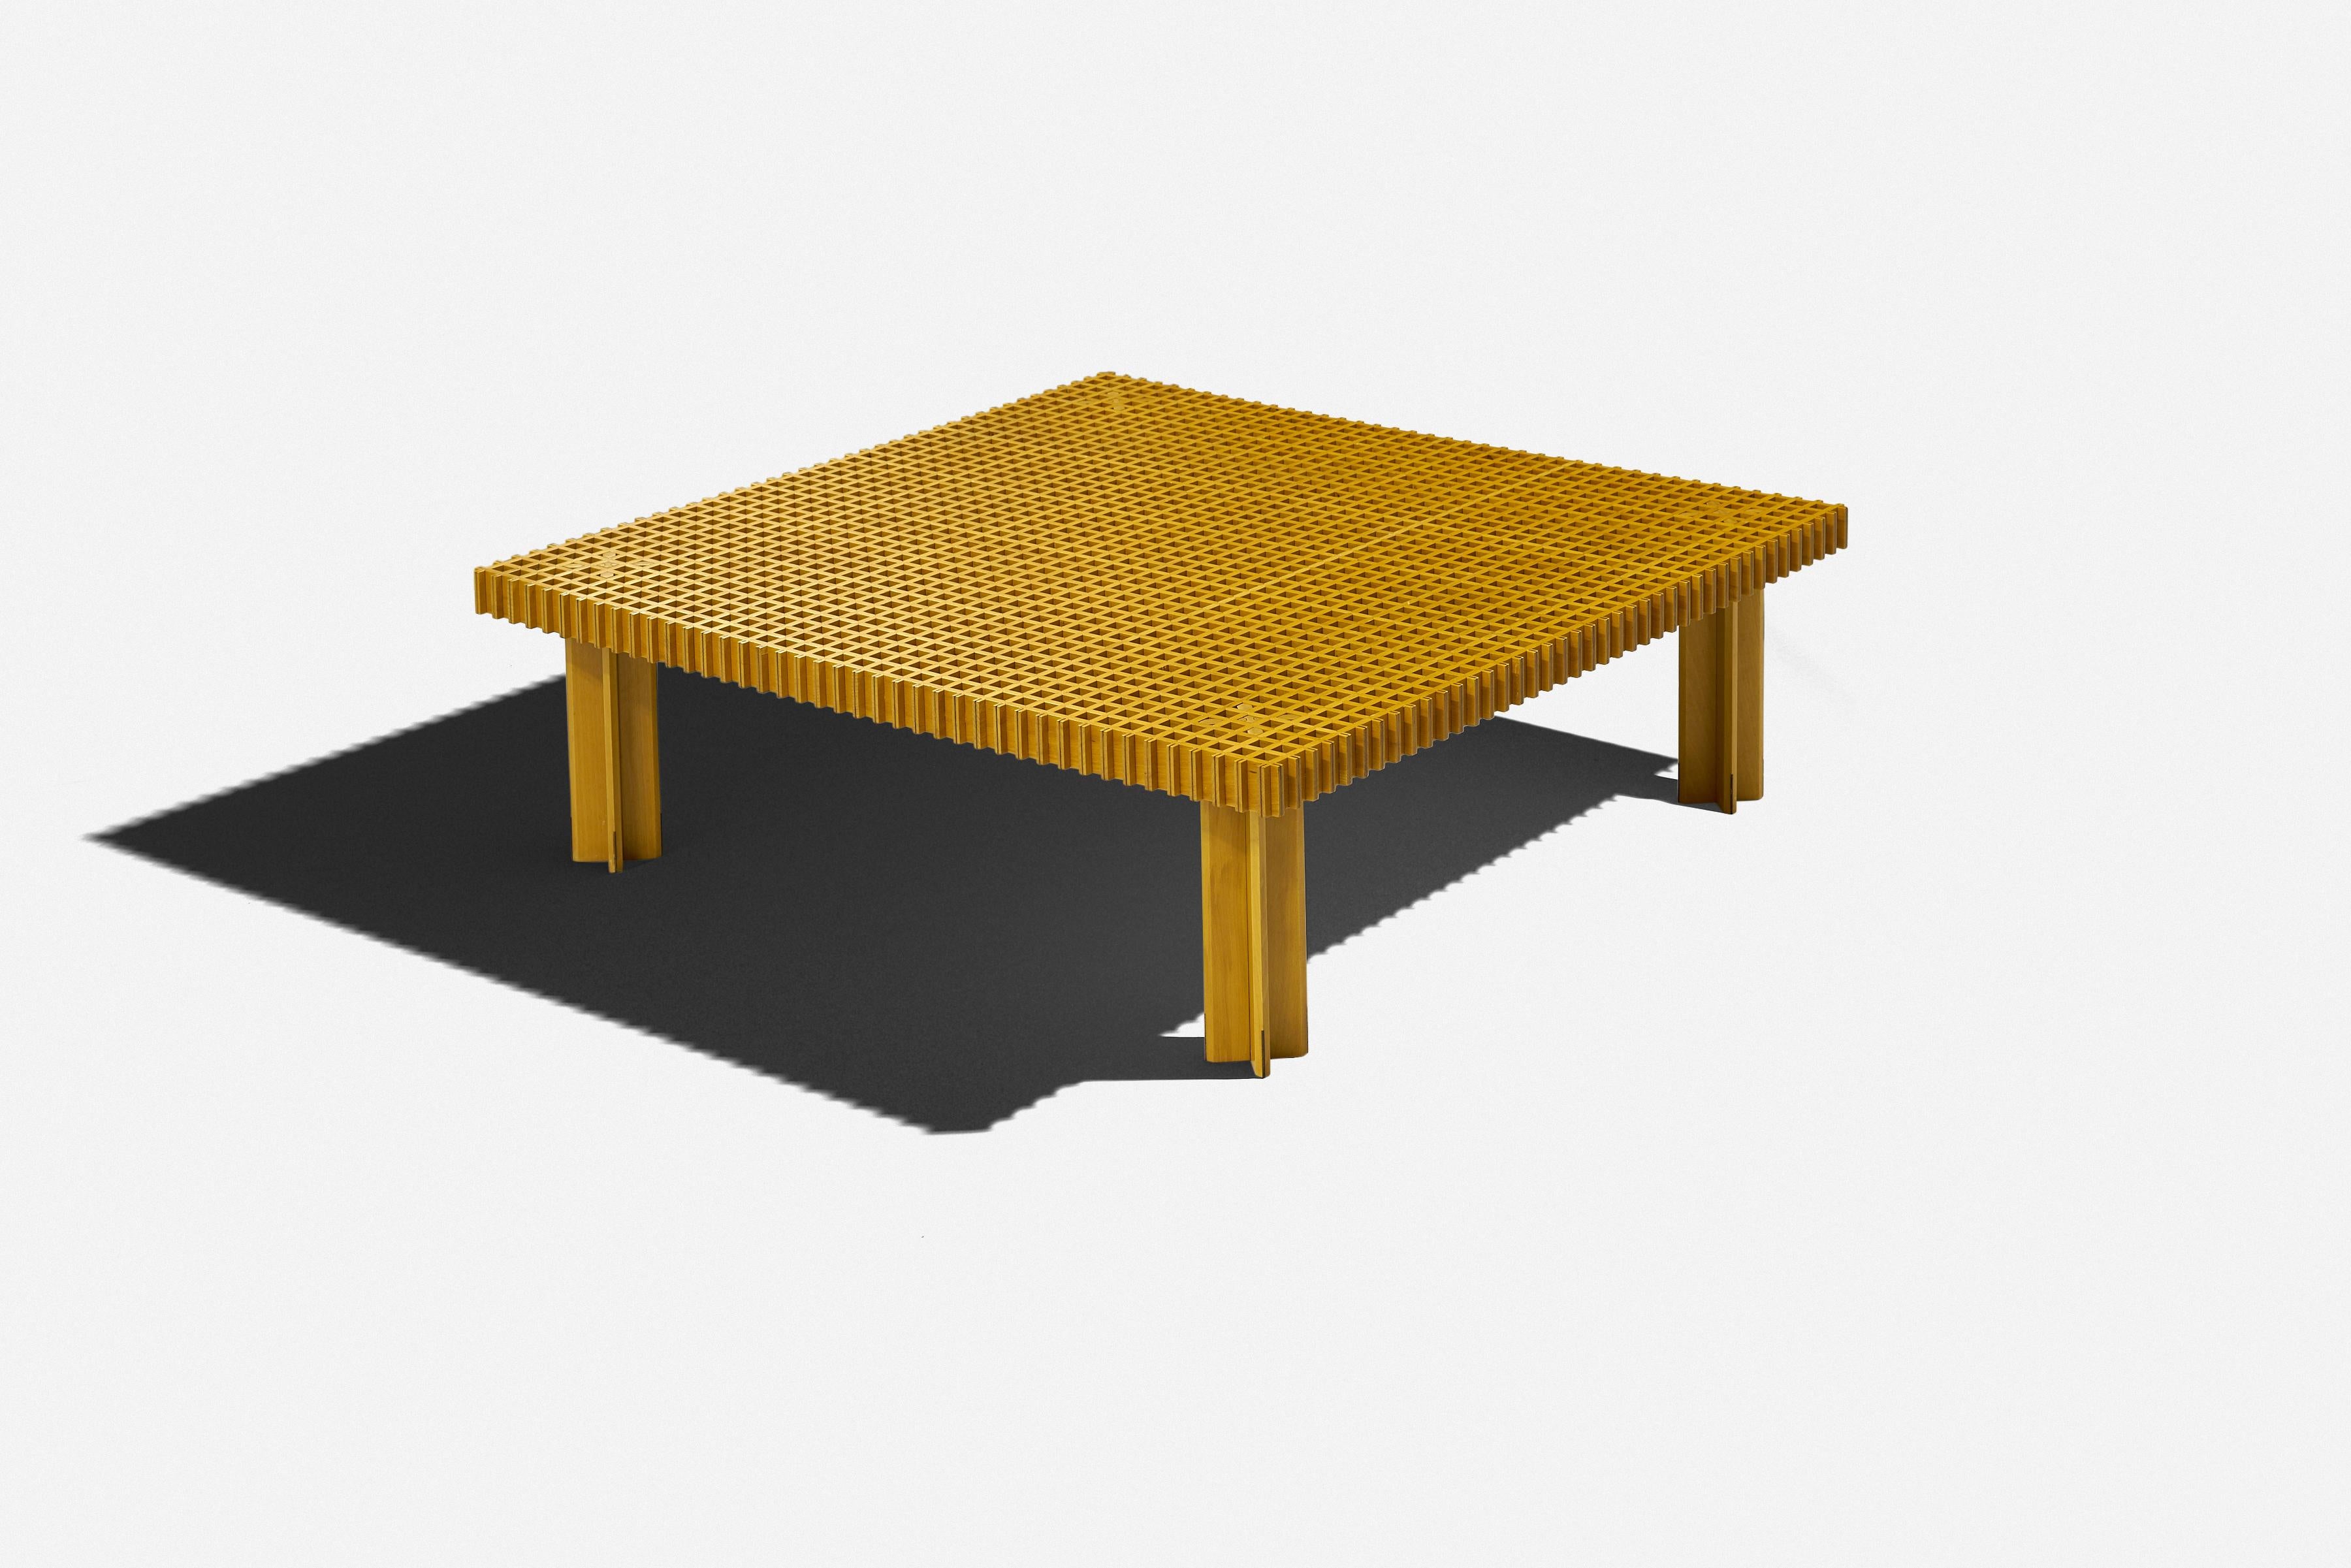 Gianfranco Frattini
Kyoto coffee table
Ghianda sold by Knoll
Italy 
jointed beech
44½ w × 44½ d inches

This is the original production from the Ghianda, not a new reproduction. Legs can be spaced at different widths.

Laquered Beach wood with